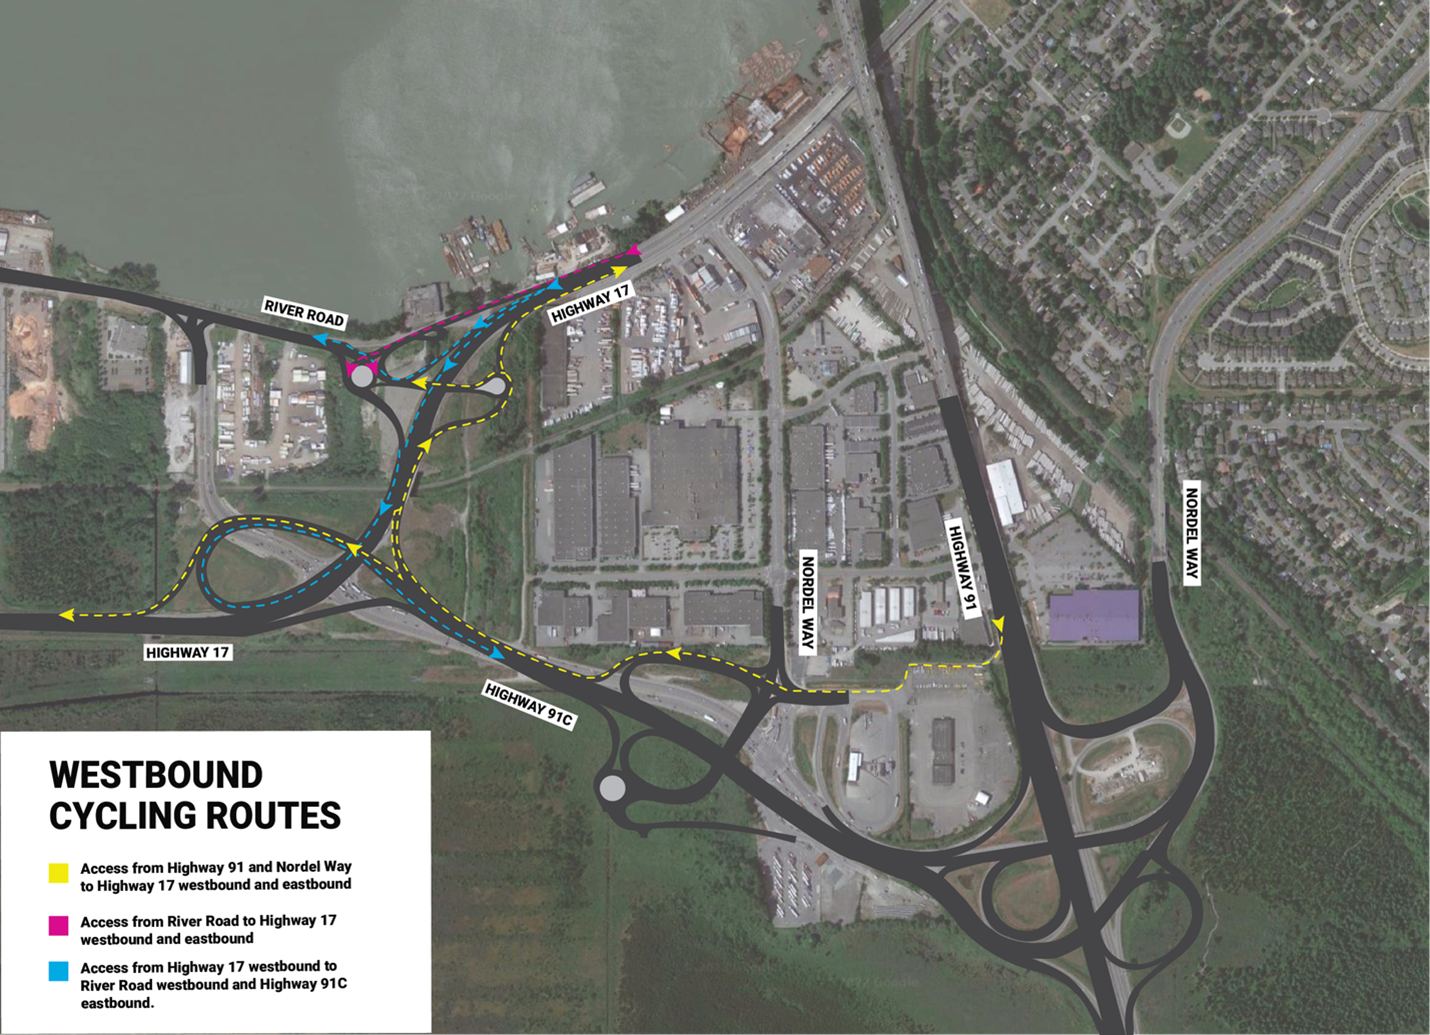 MAP A: Westbound cycling routes between Nordel Way and Highway 17. 